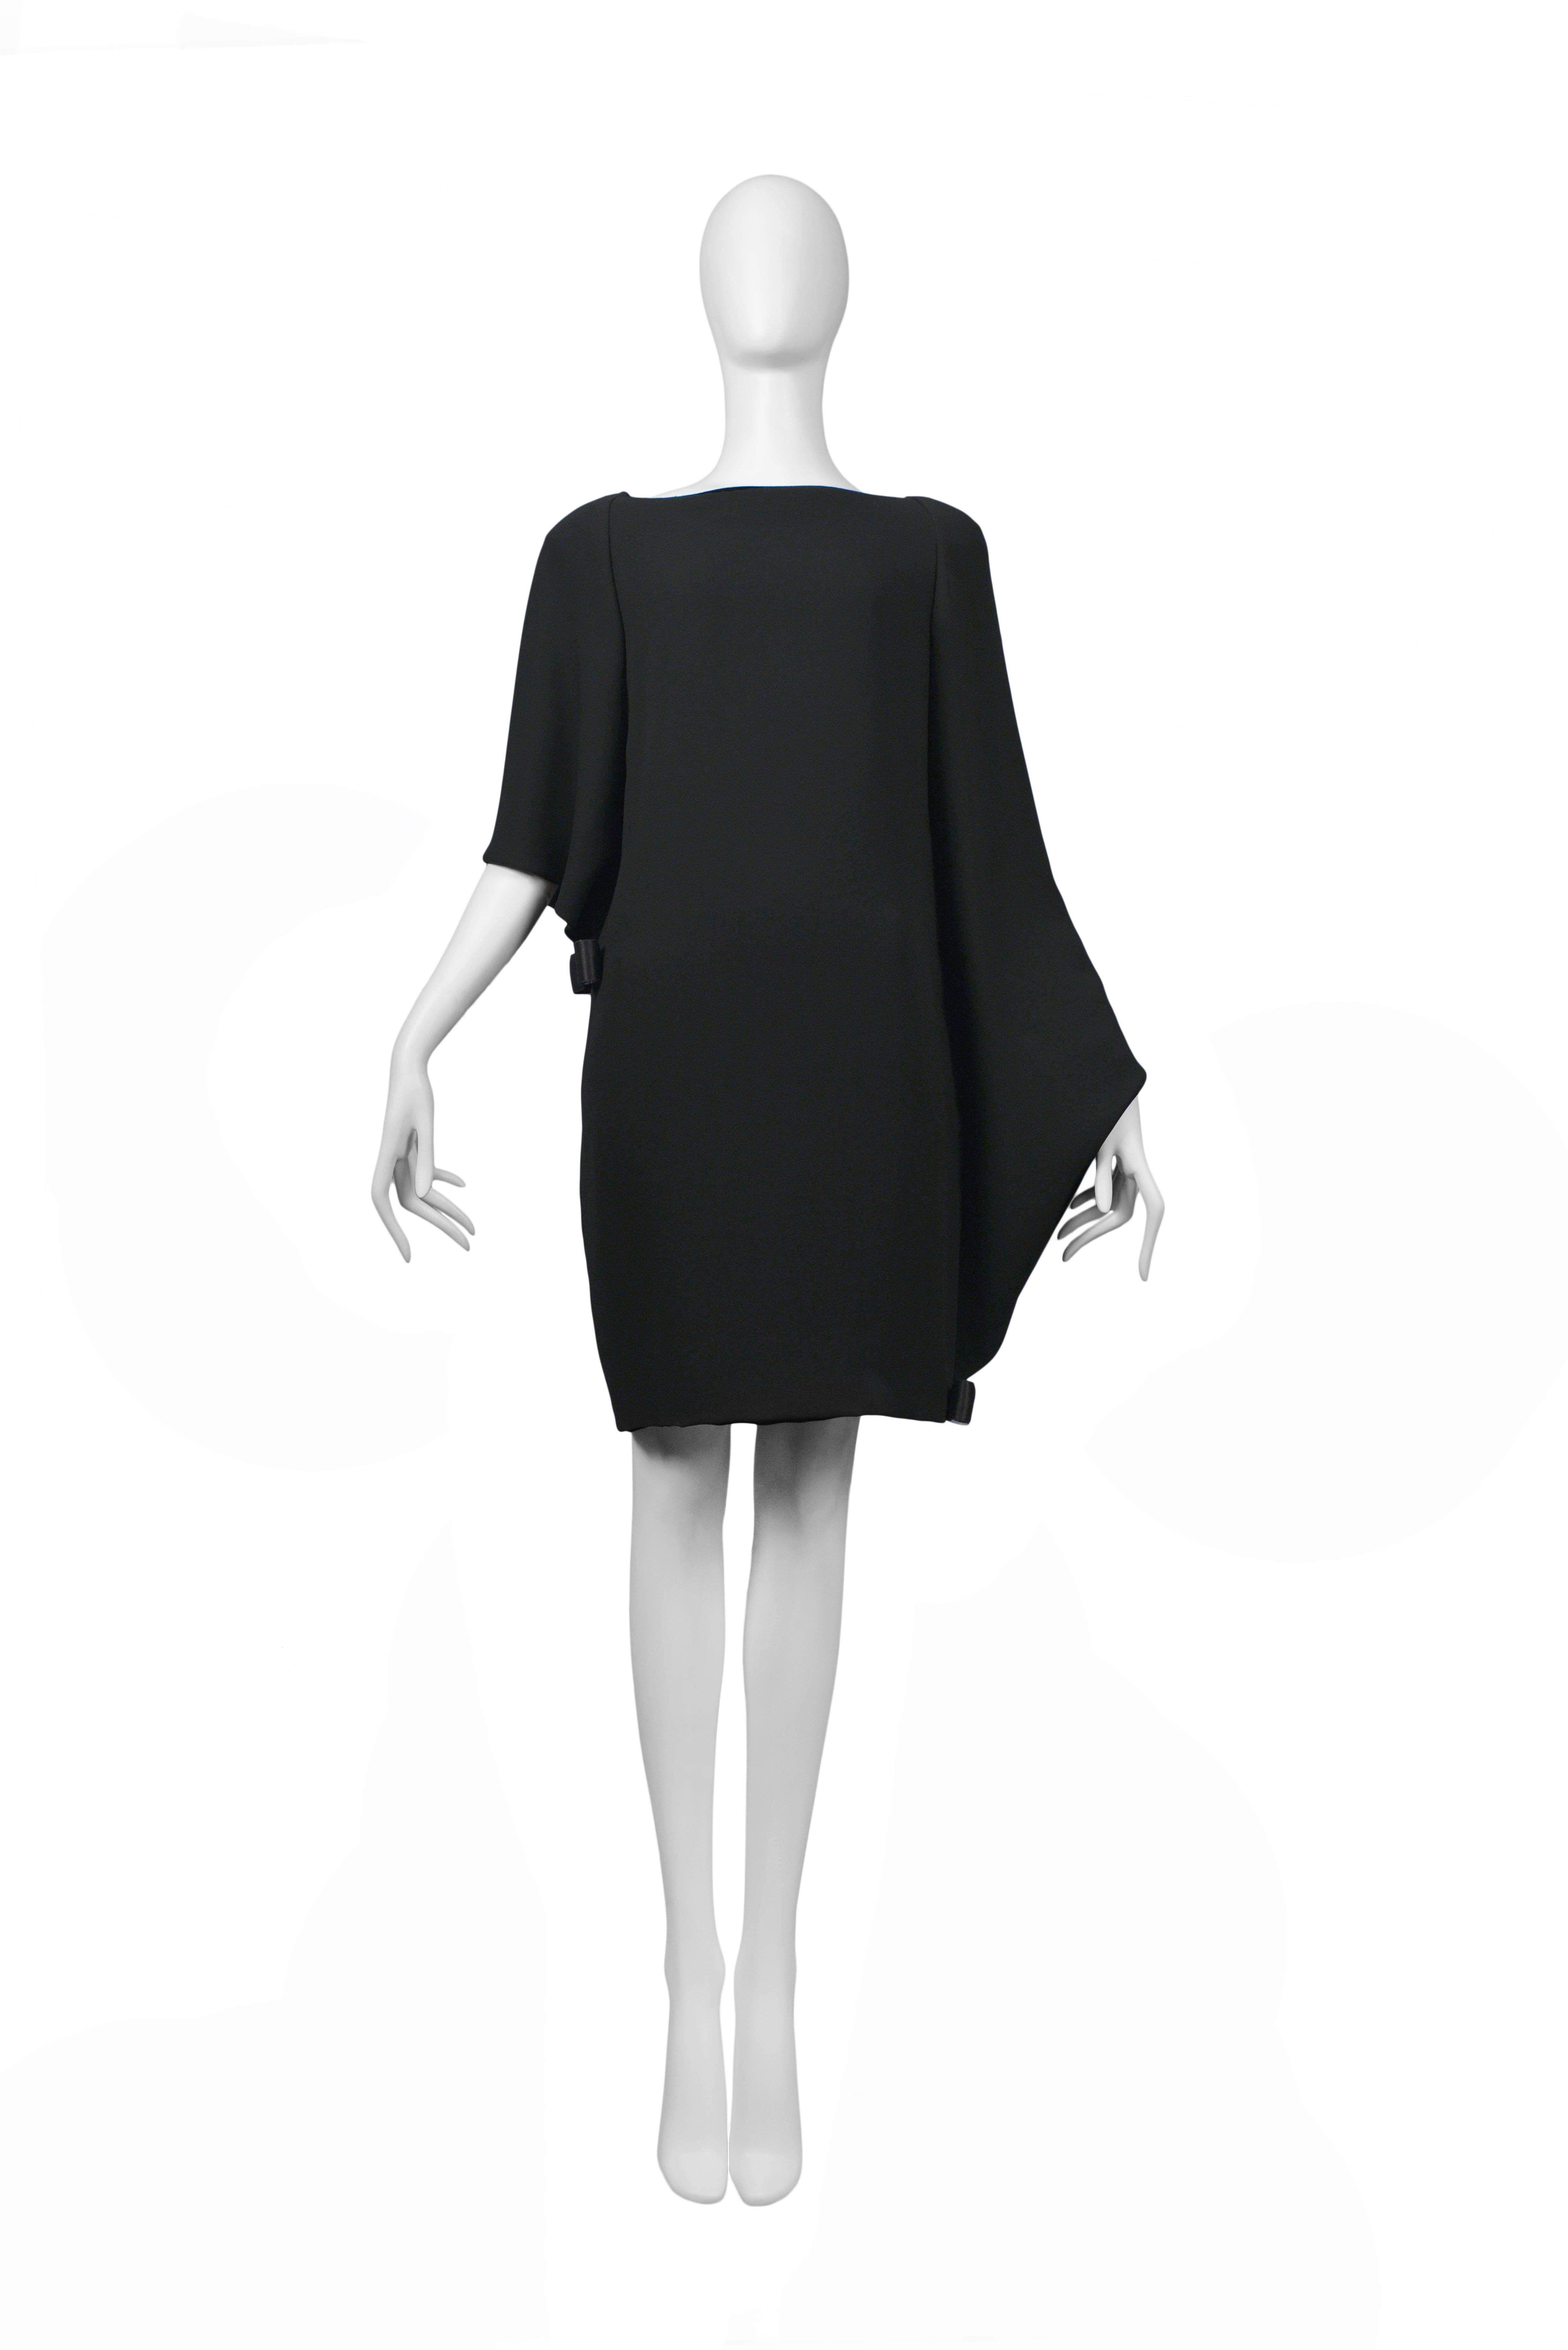 Pierre Cardin Couture black folding architectural dress with bows at hem and bust. Shawl drape back. Circa, 1986-1993.
